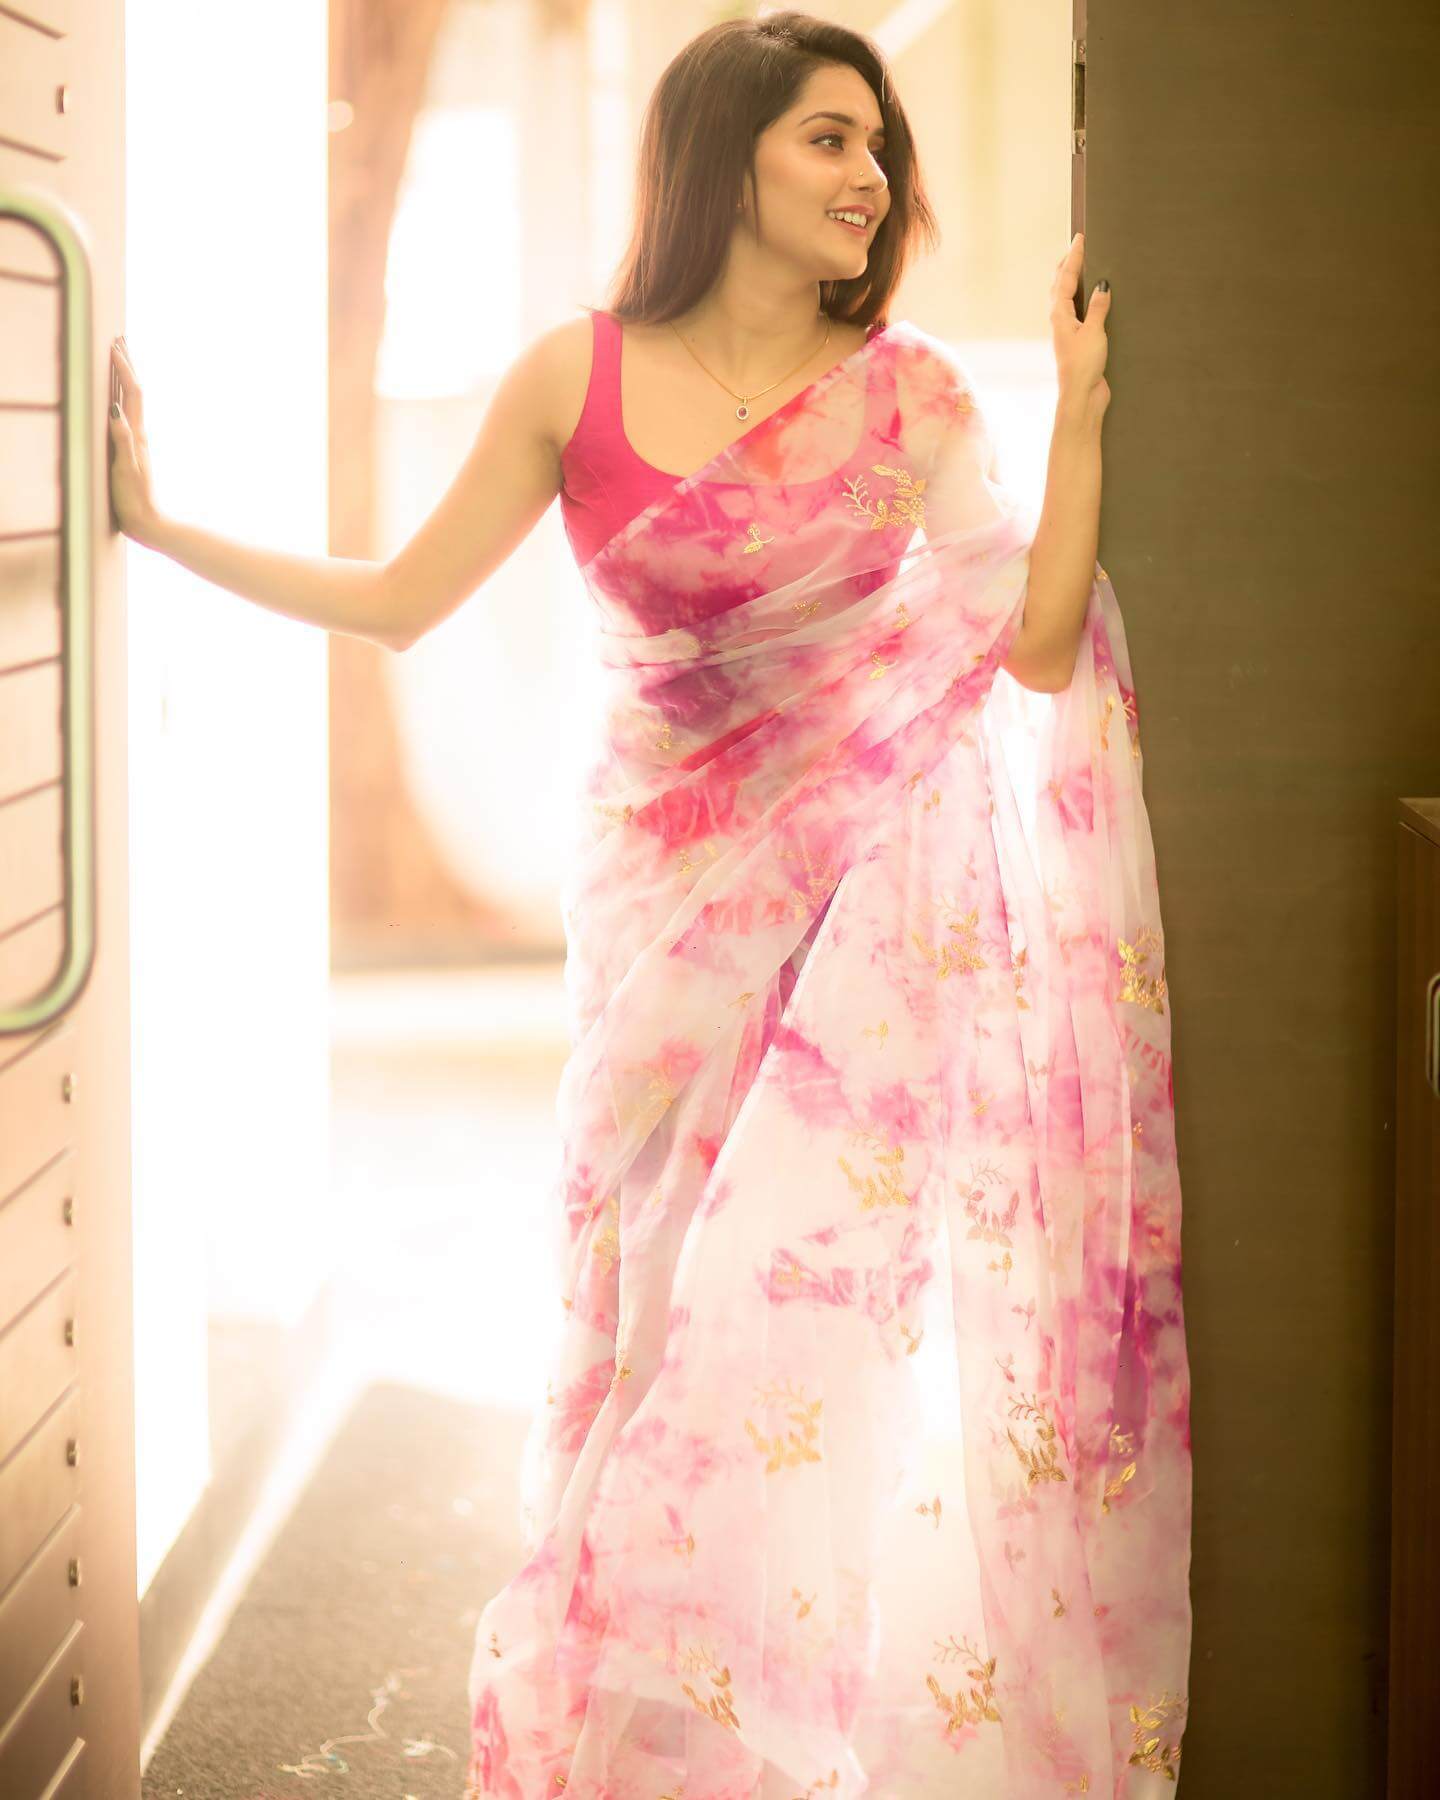 Beautiful Mahima Nambiar In Pink & White Georgette Saree With Sleeveless Pink Blouse